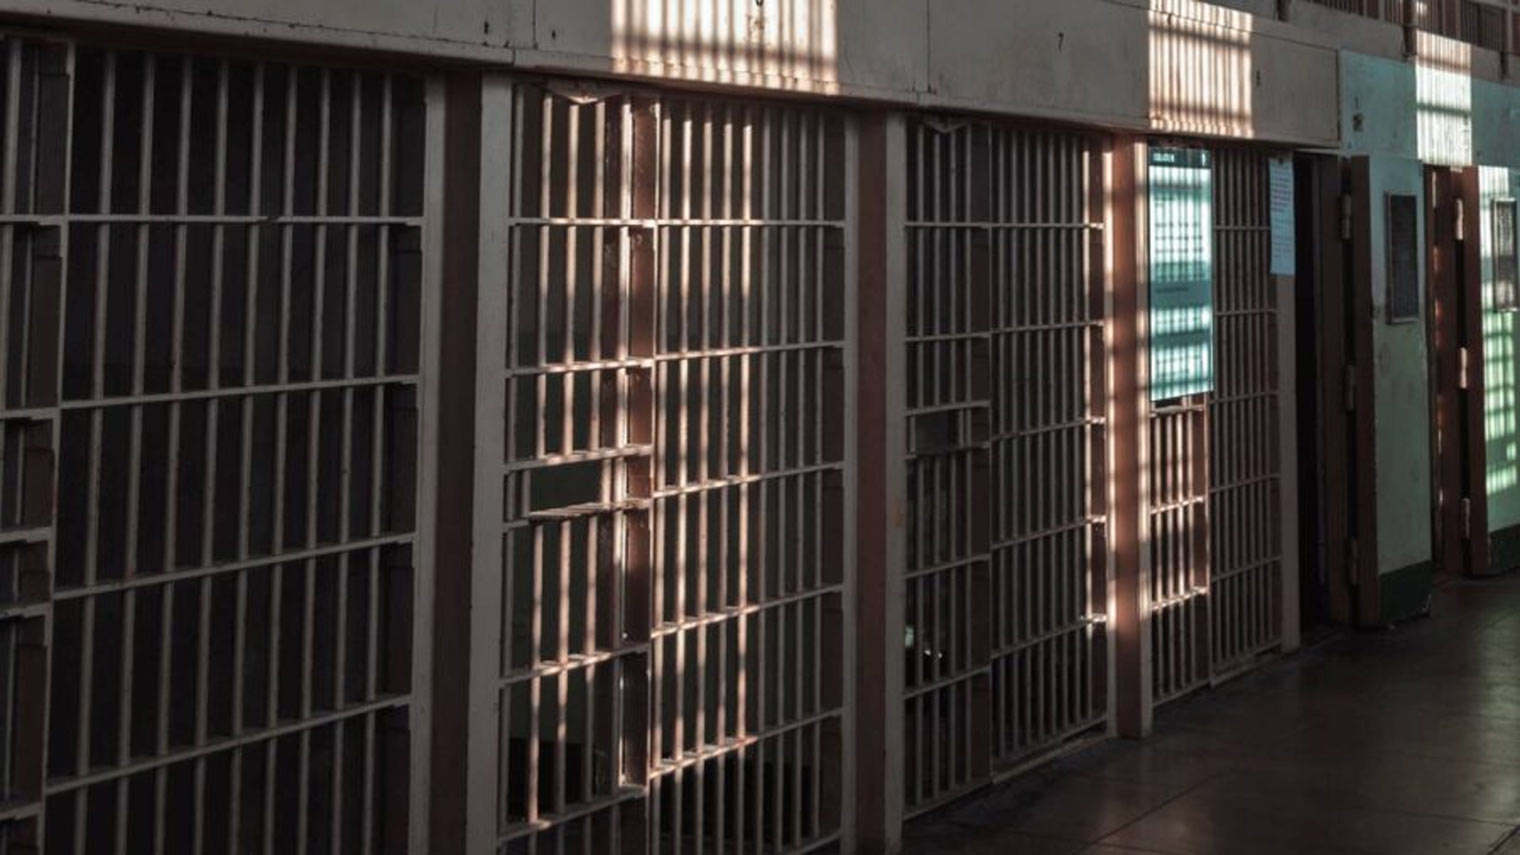 Stock image of a row of prison cells. Two Arizona brothers were sentenced to prison for their roles...